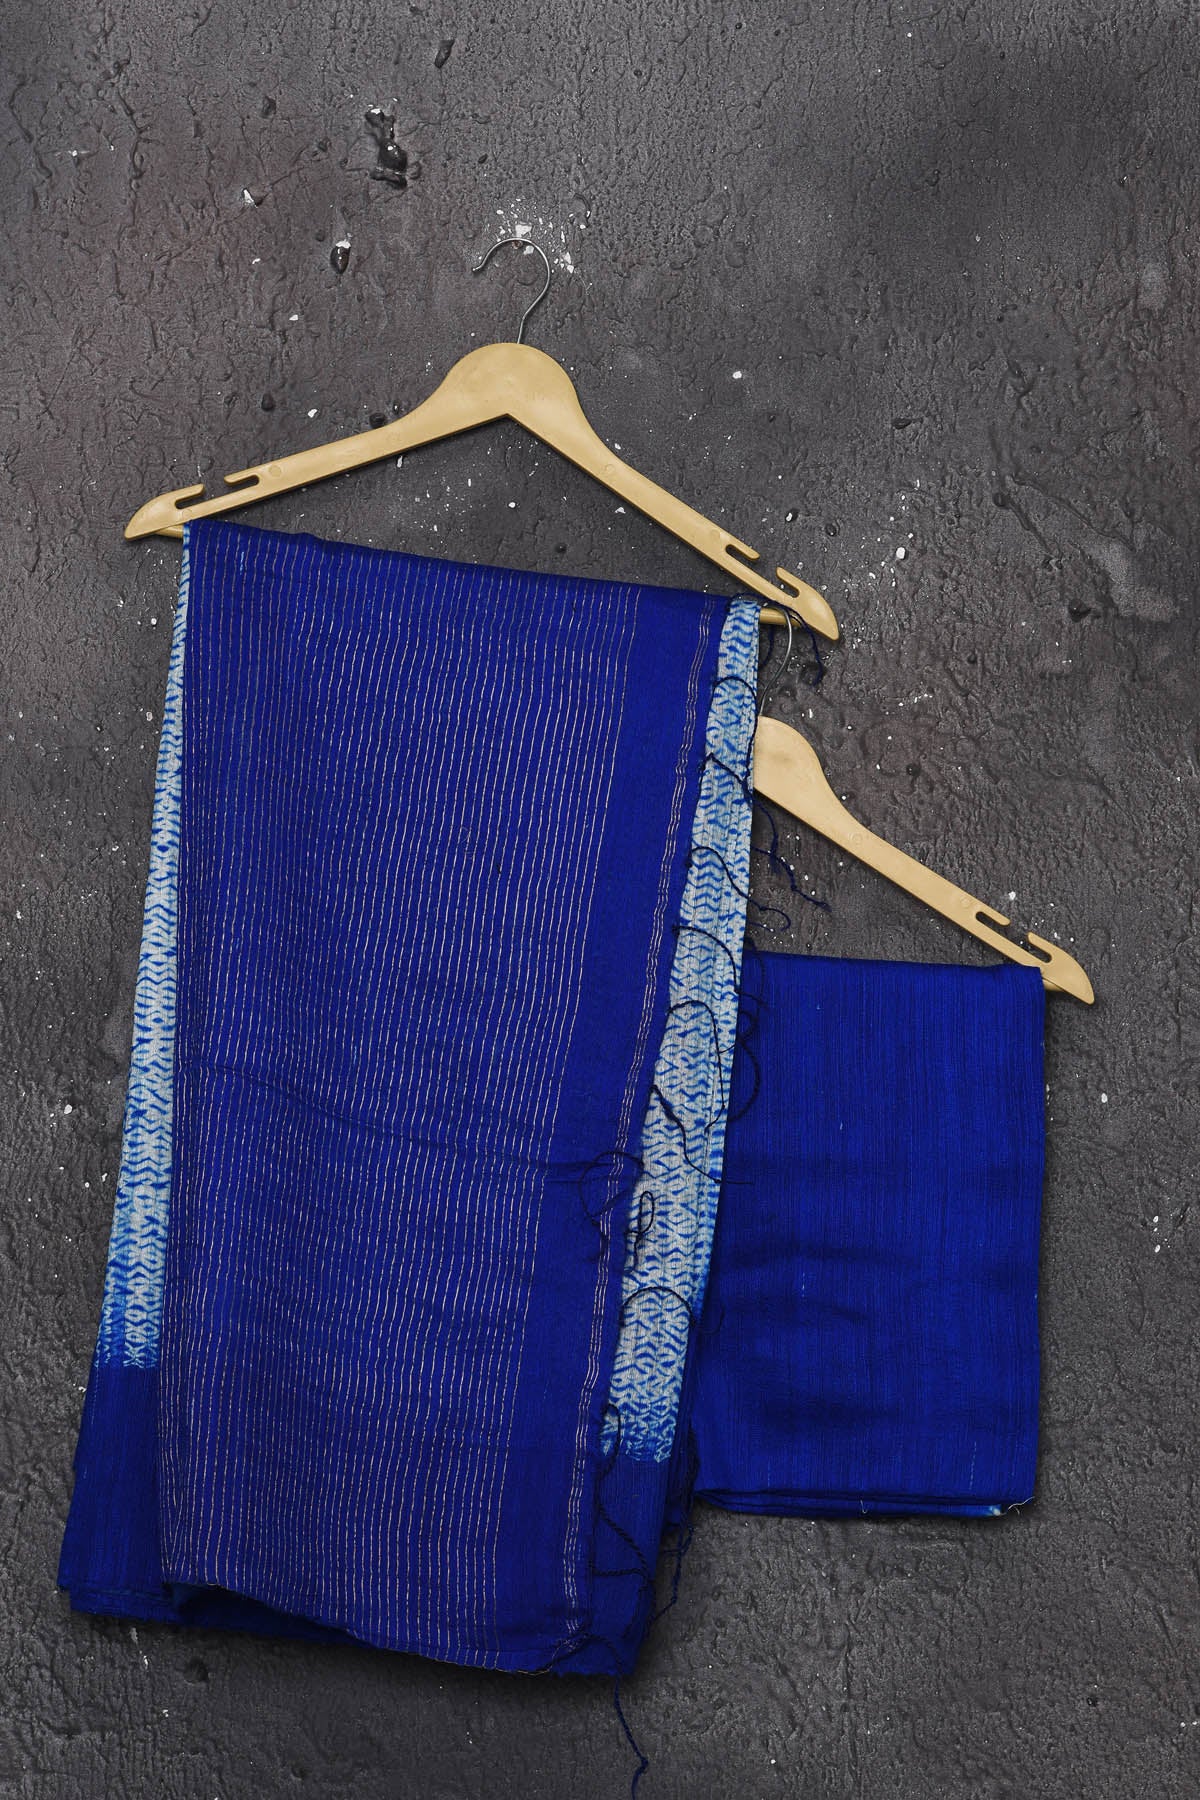 Shop this elegant offwhite-blue handloom shibori tussar saree online in USA which is handcrafted from fine silk tussar fabric, this tie and dye saree brings out the nature of flow. You can pair this beautiful shibori print with minimal jewellery for a casual day outfit. Add this plain shibori saree to your collection from Pure Elegance Indian fashion store in USA.-Unstitched pallu.